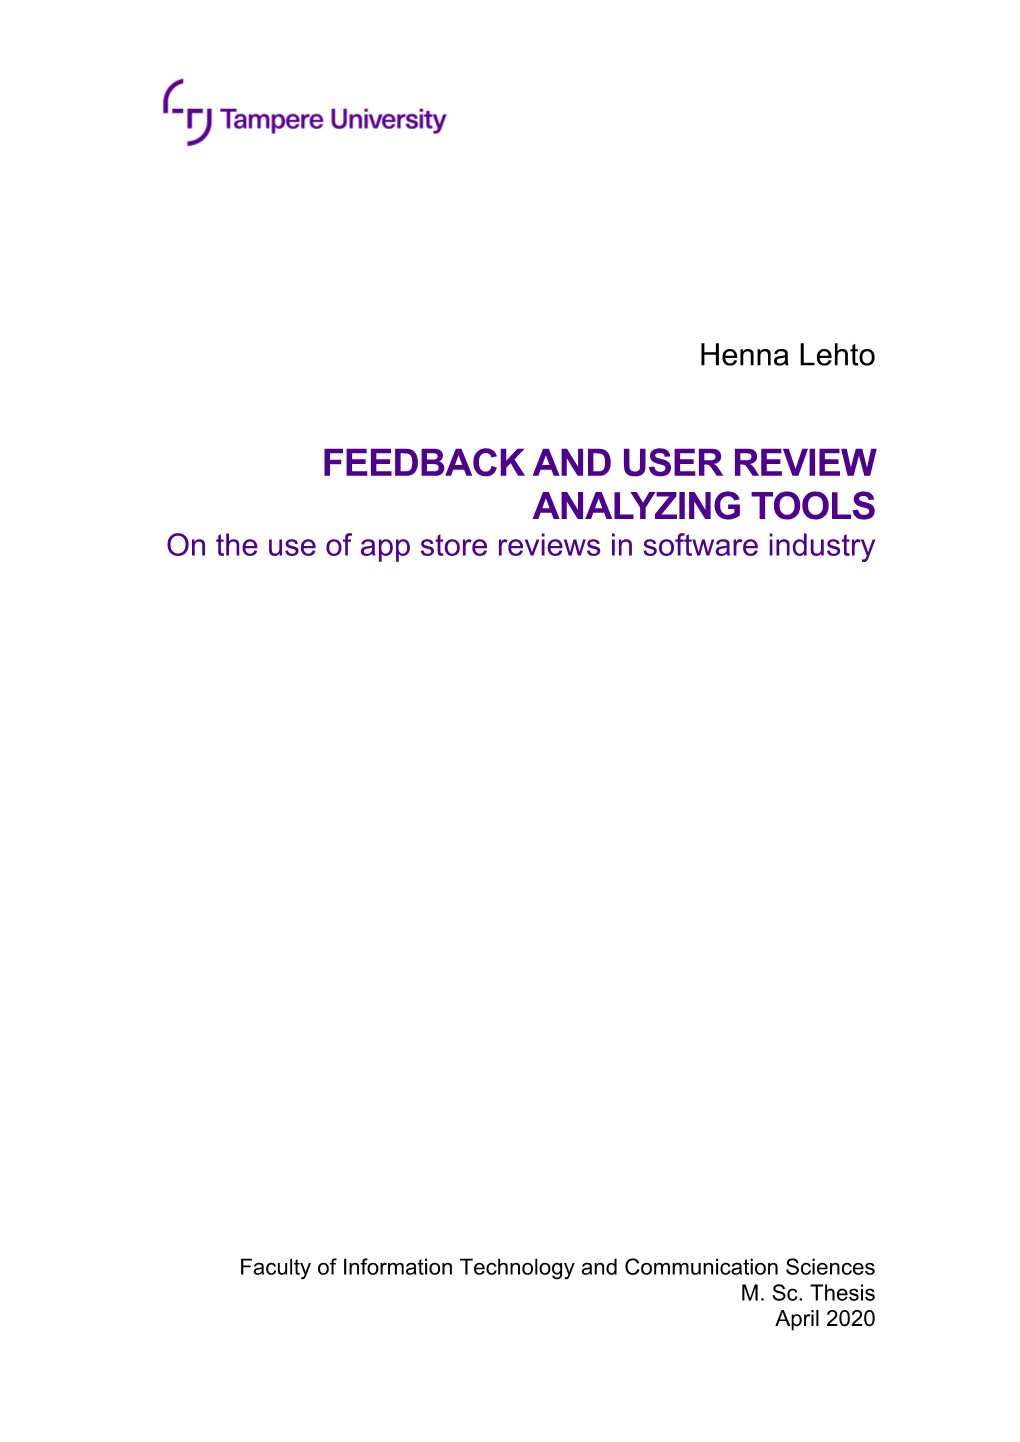 FEEDBACK and USER REVIEW ANALYZING TOOLS on the Use of App Store Reviews in Software Industry